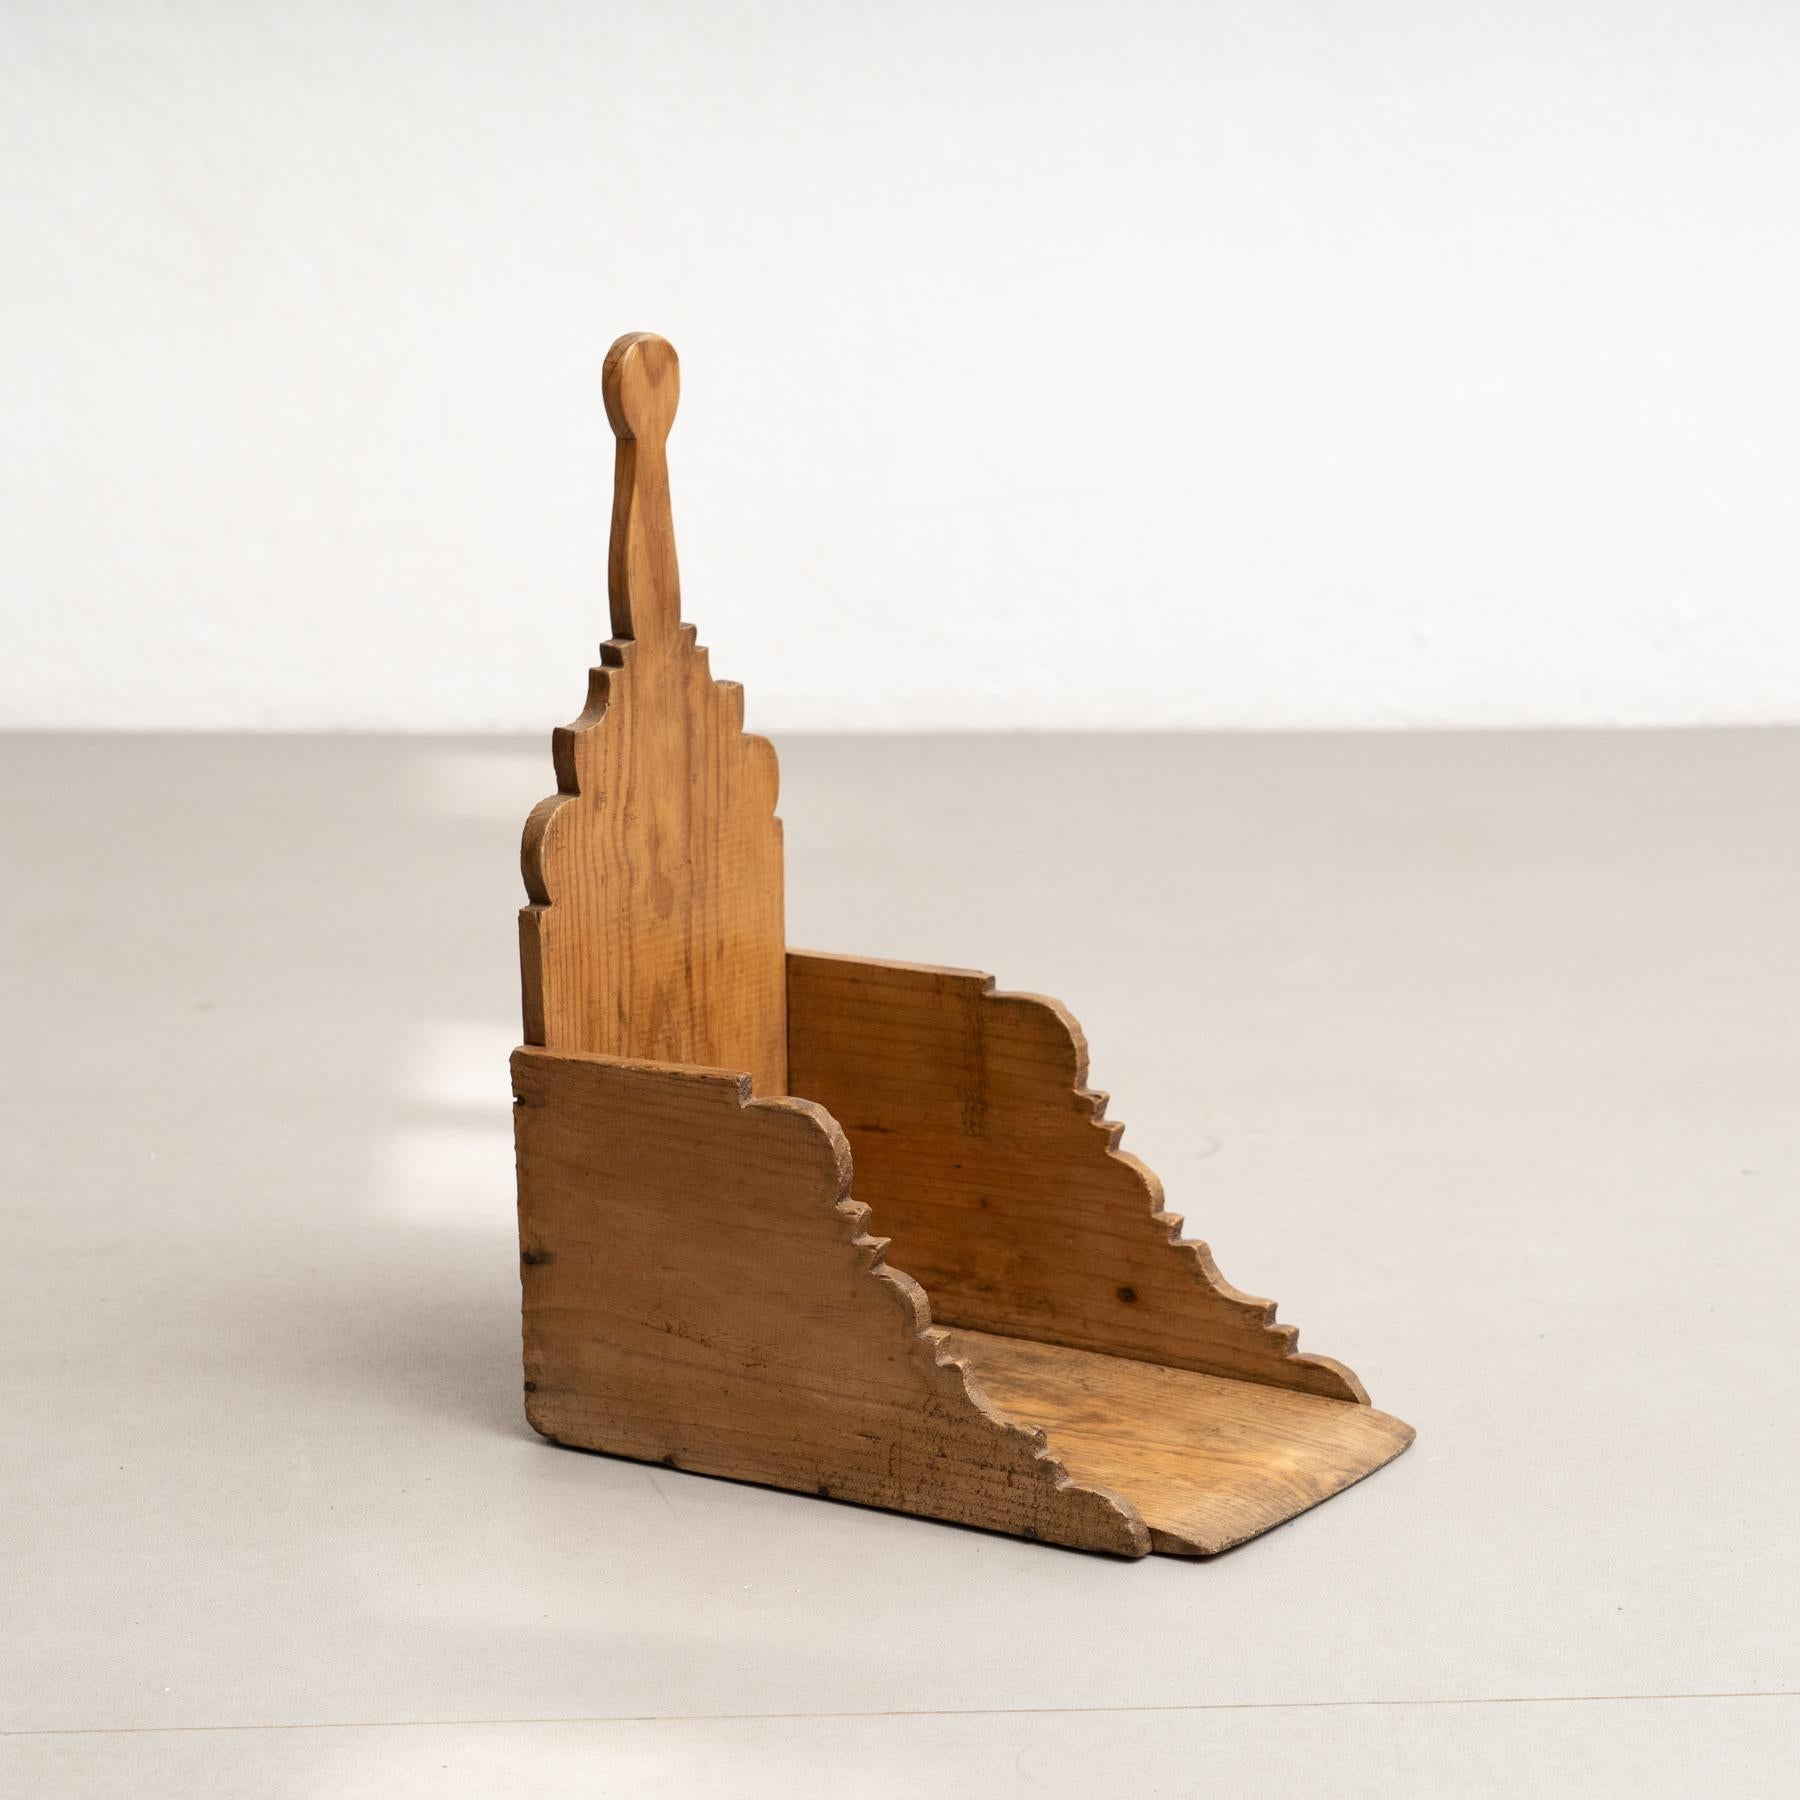 Early 20th Century Rustic Sculptural Wood Broom Dustpan

By unknown manufacturer in France.

In original condition, preserving a beautiful patina.